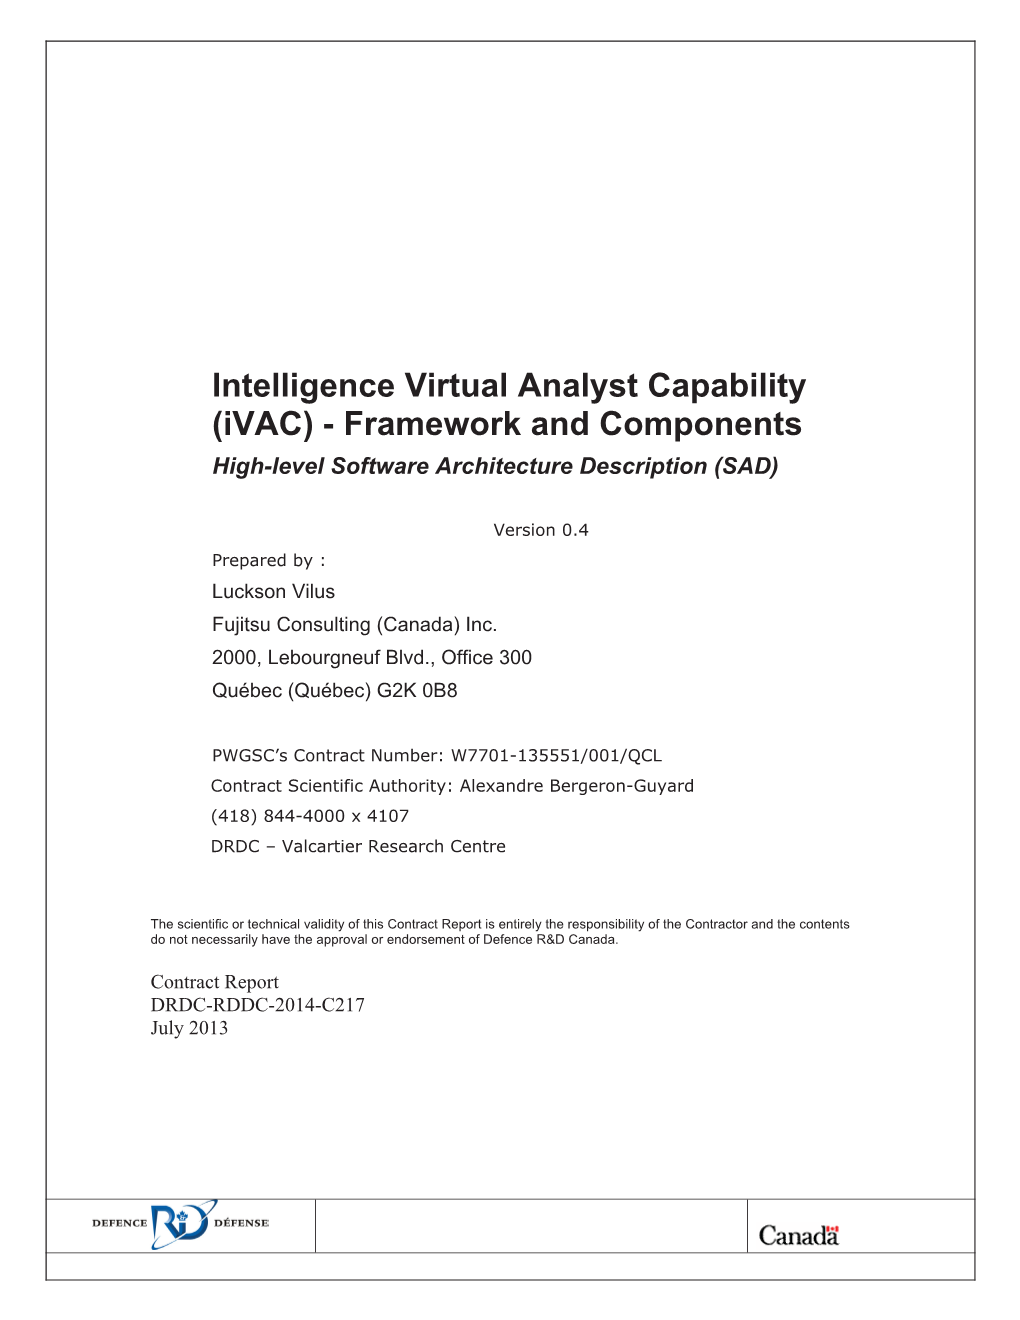 Intelligence Virtual Analyst Capability (Ivac) - Framework and Components High-Level Software Architecture Description (SAD)